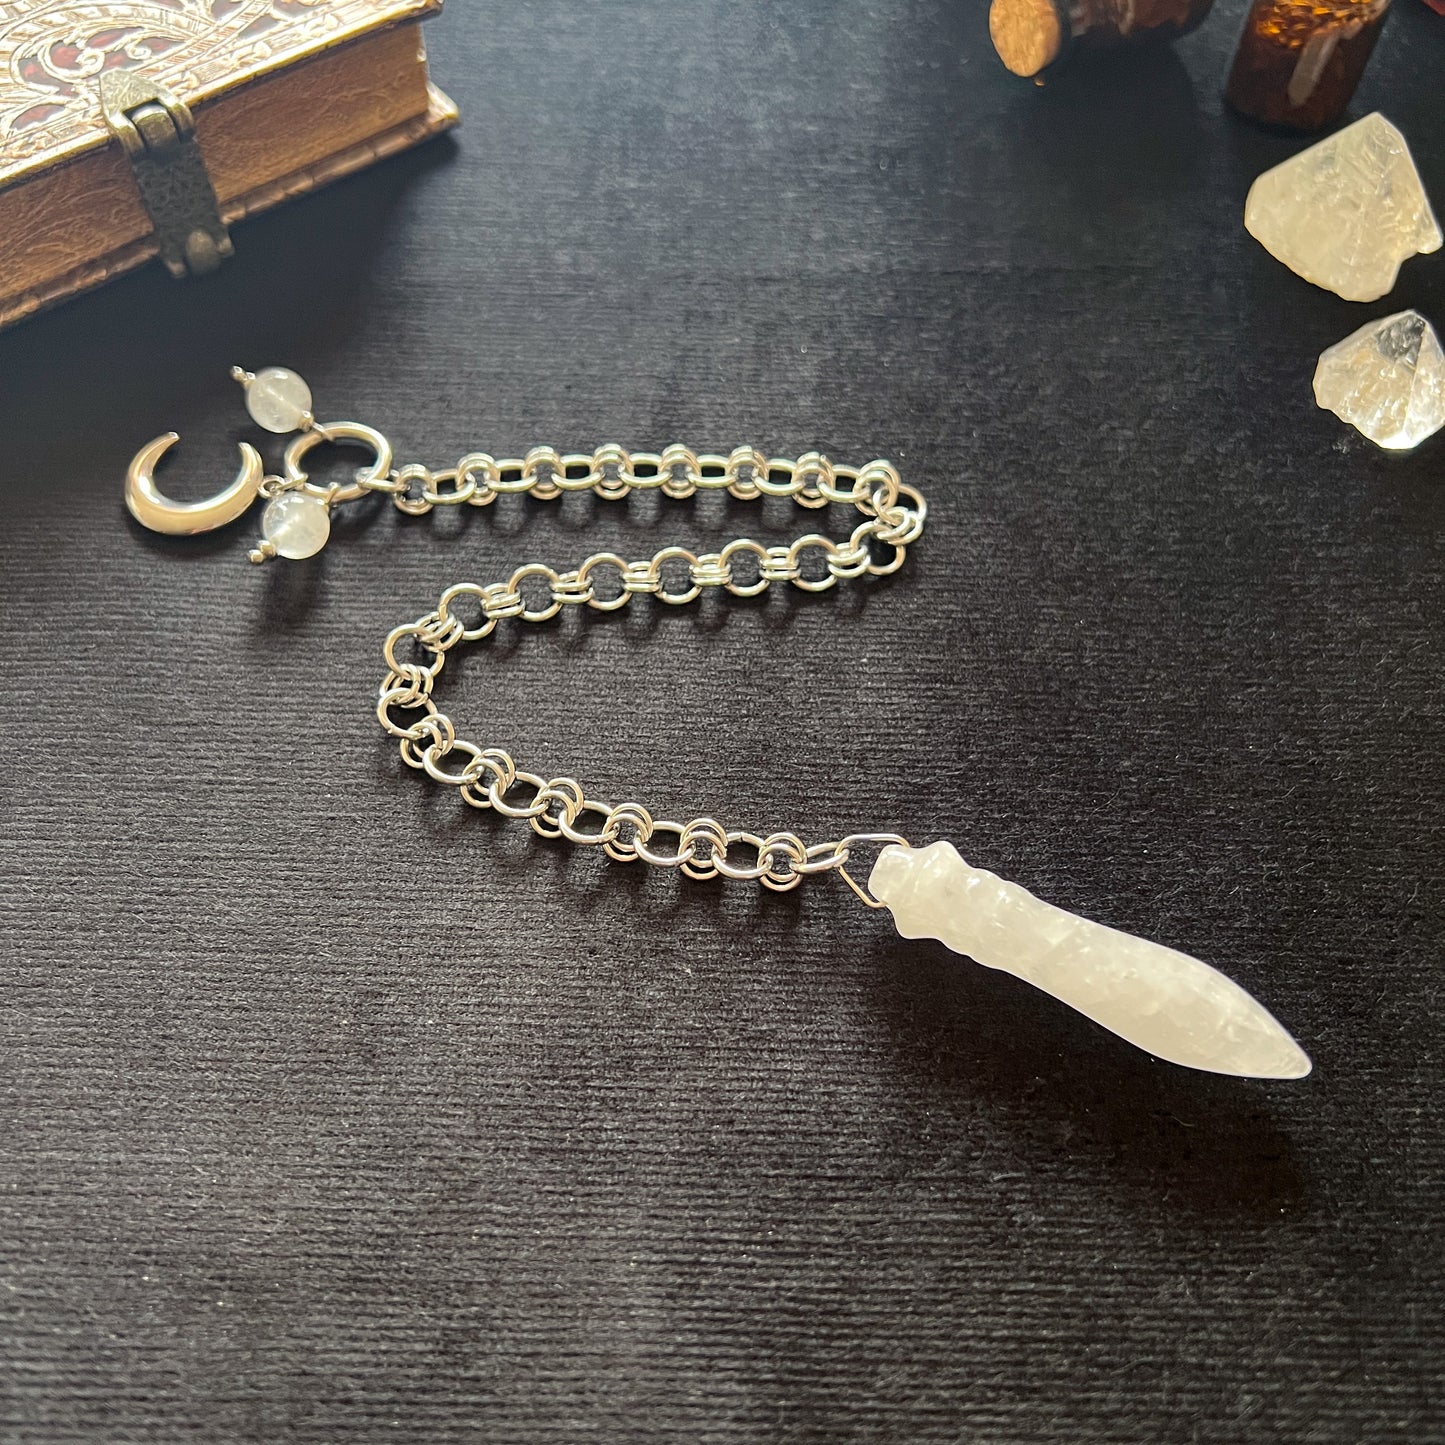 Egyptian Thot pendulum quartz chainmail, crescent moon and stainless steel Baguette Magick